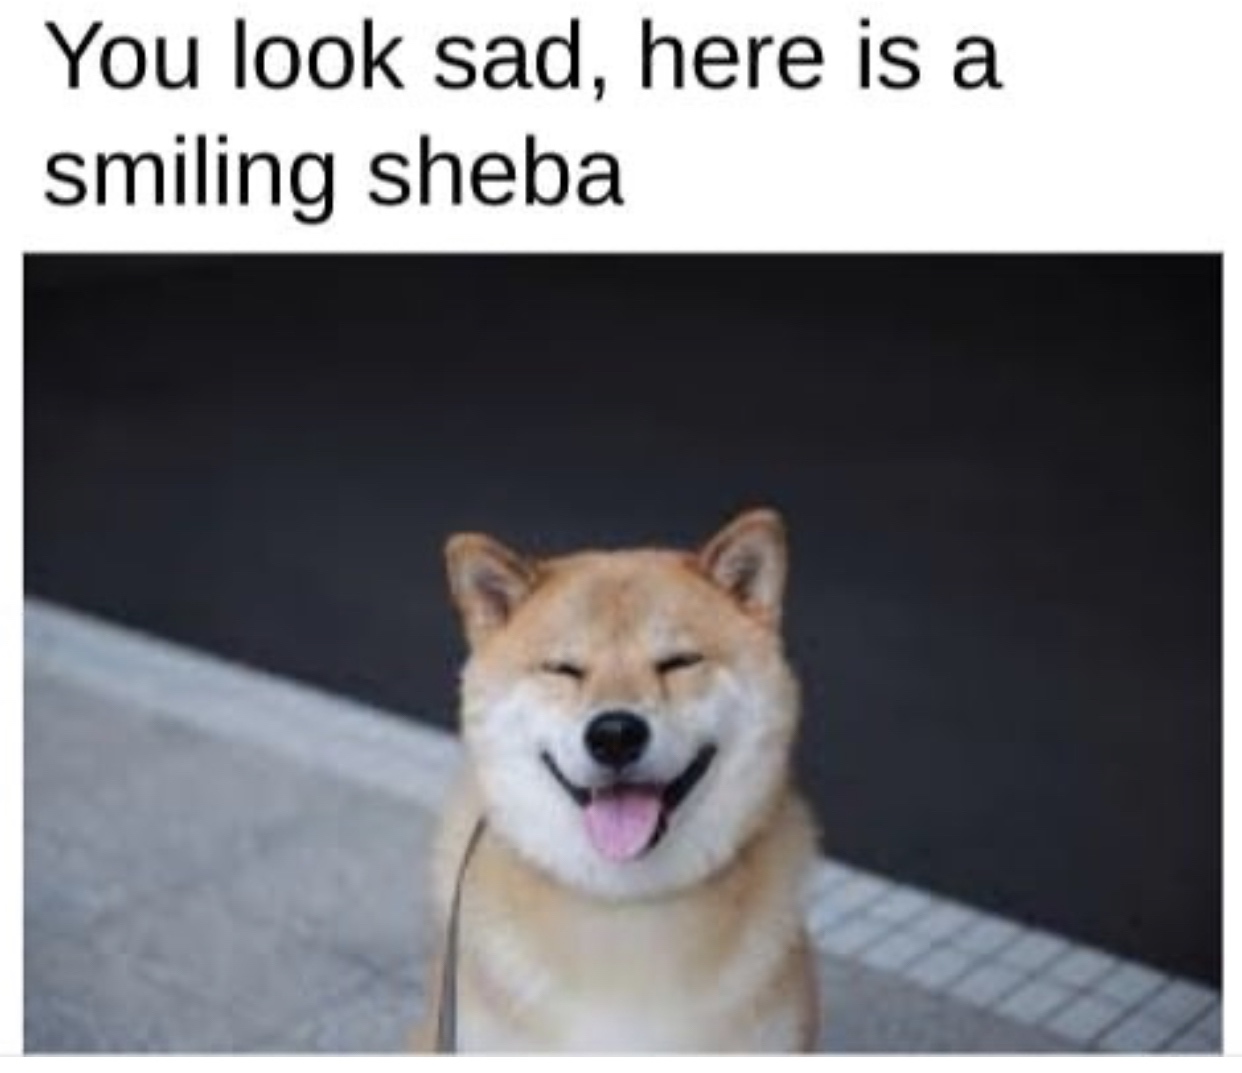 You look sad, here is a smiling sheba